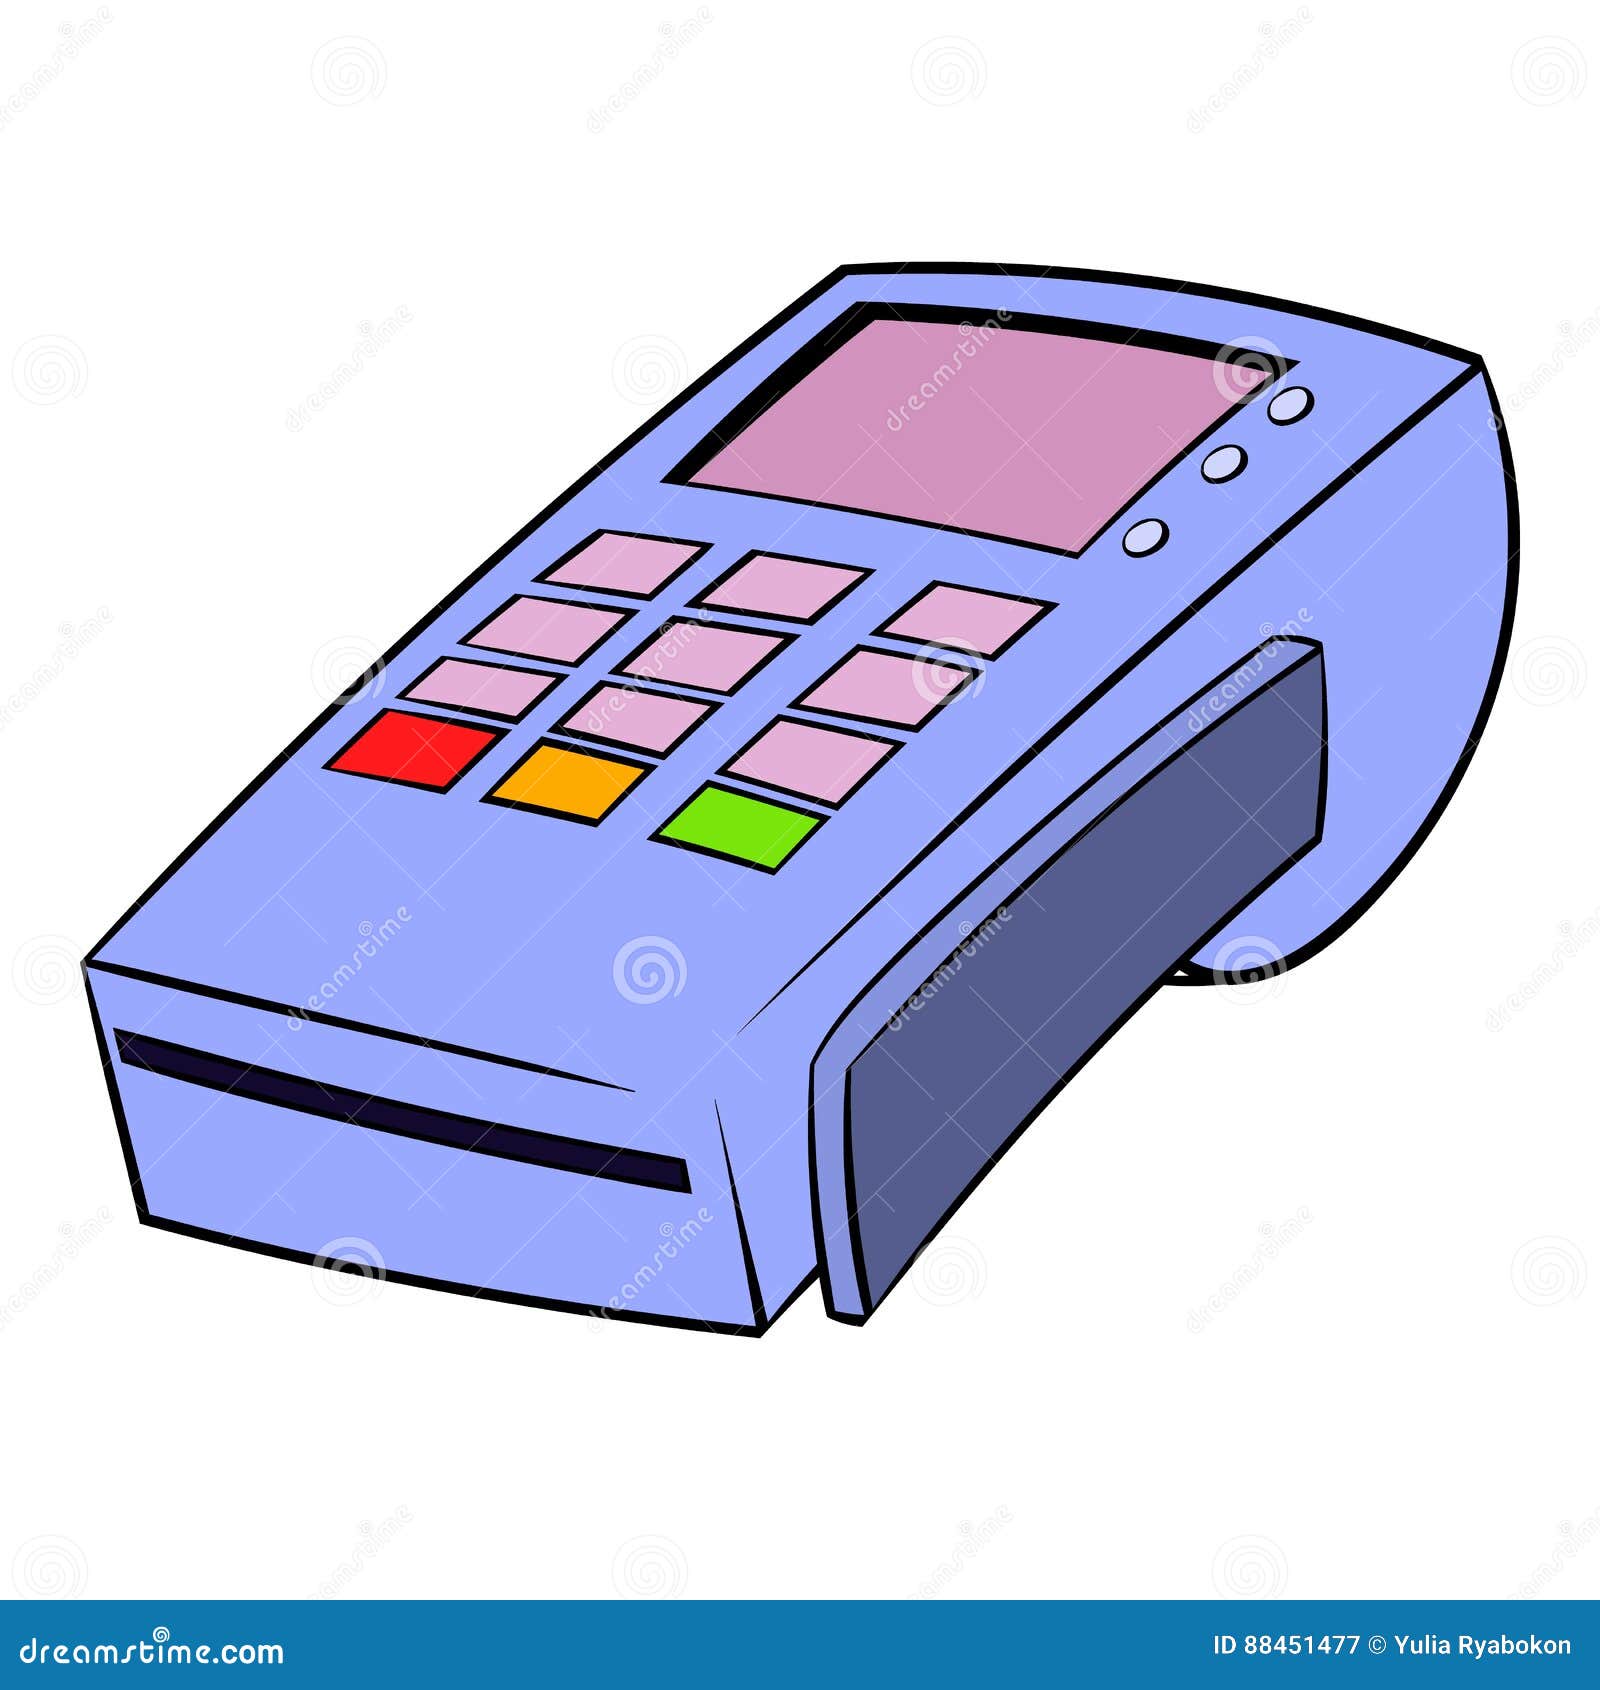 Terminal For Credit Card Icon Cartoon Stock Vector - Illustration of payment, design: 88451477